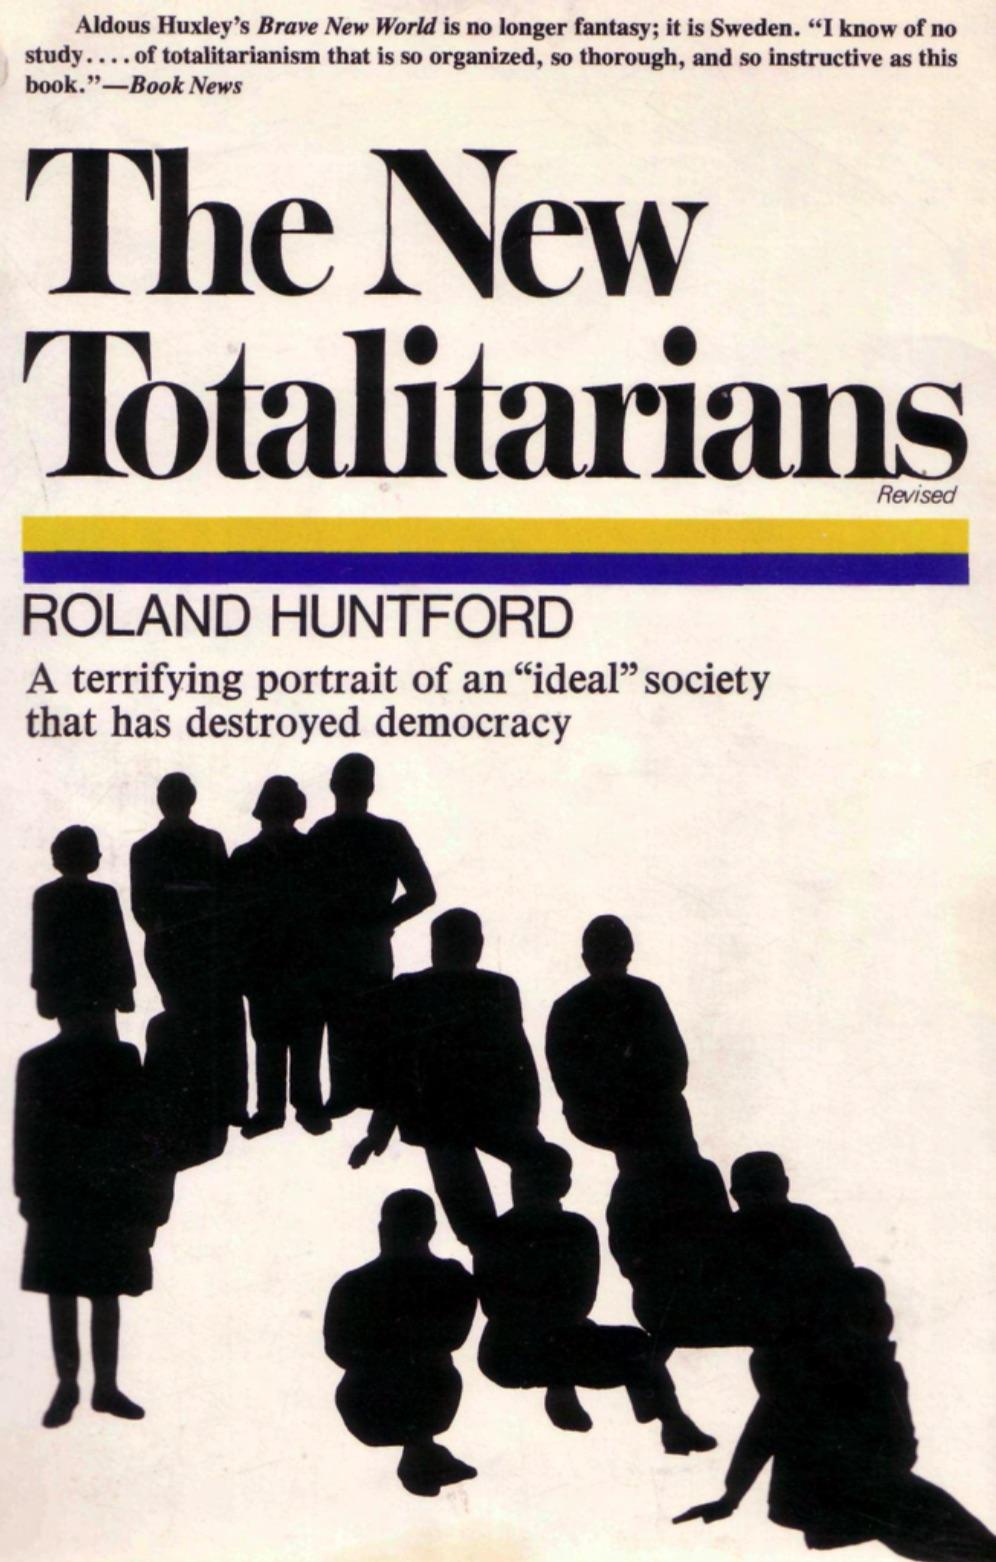 The New Totalitarians (1979) by Roland Huntford